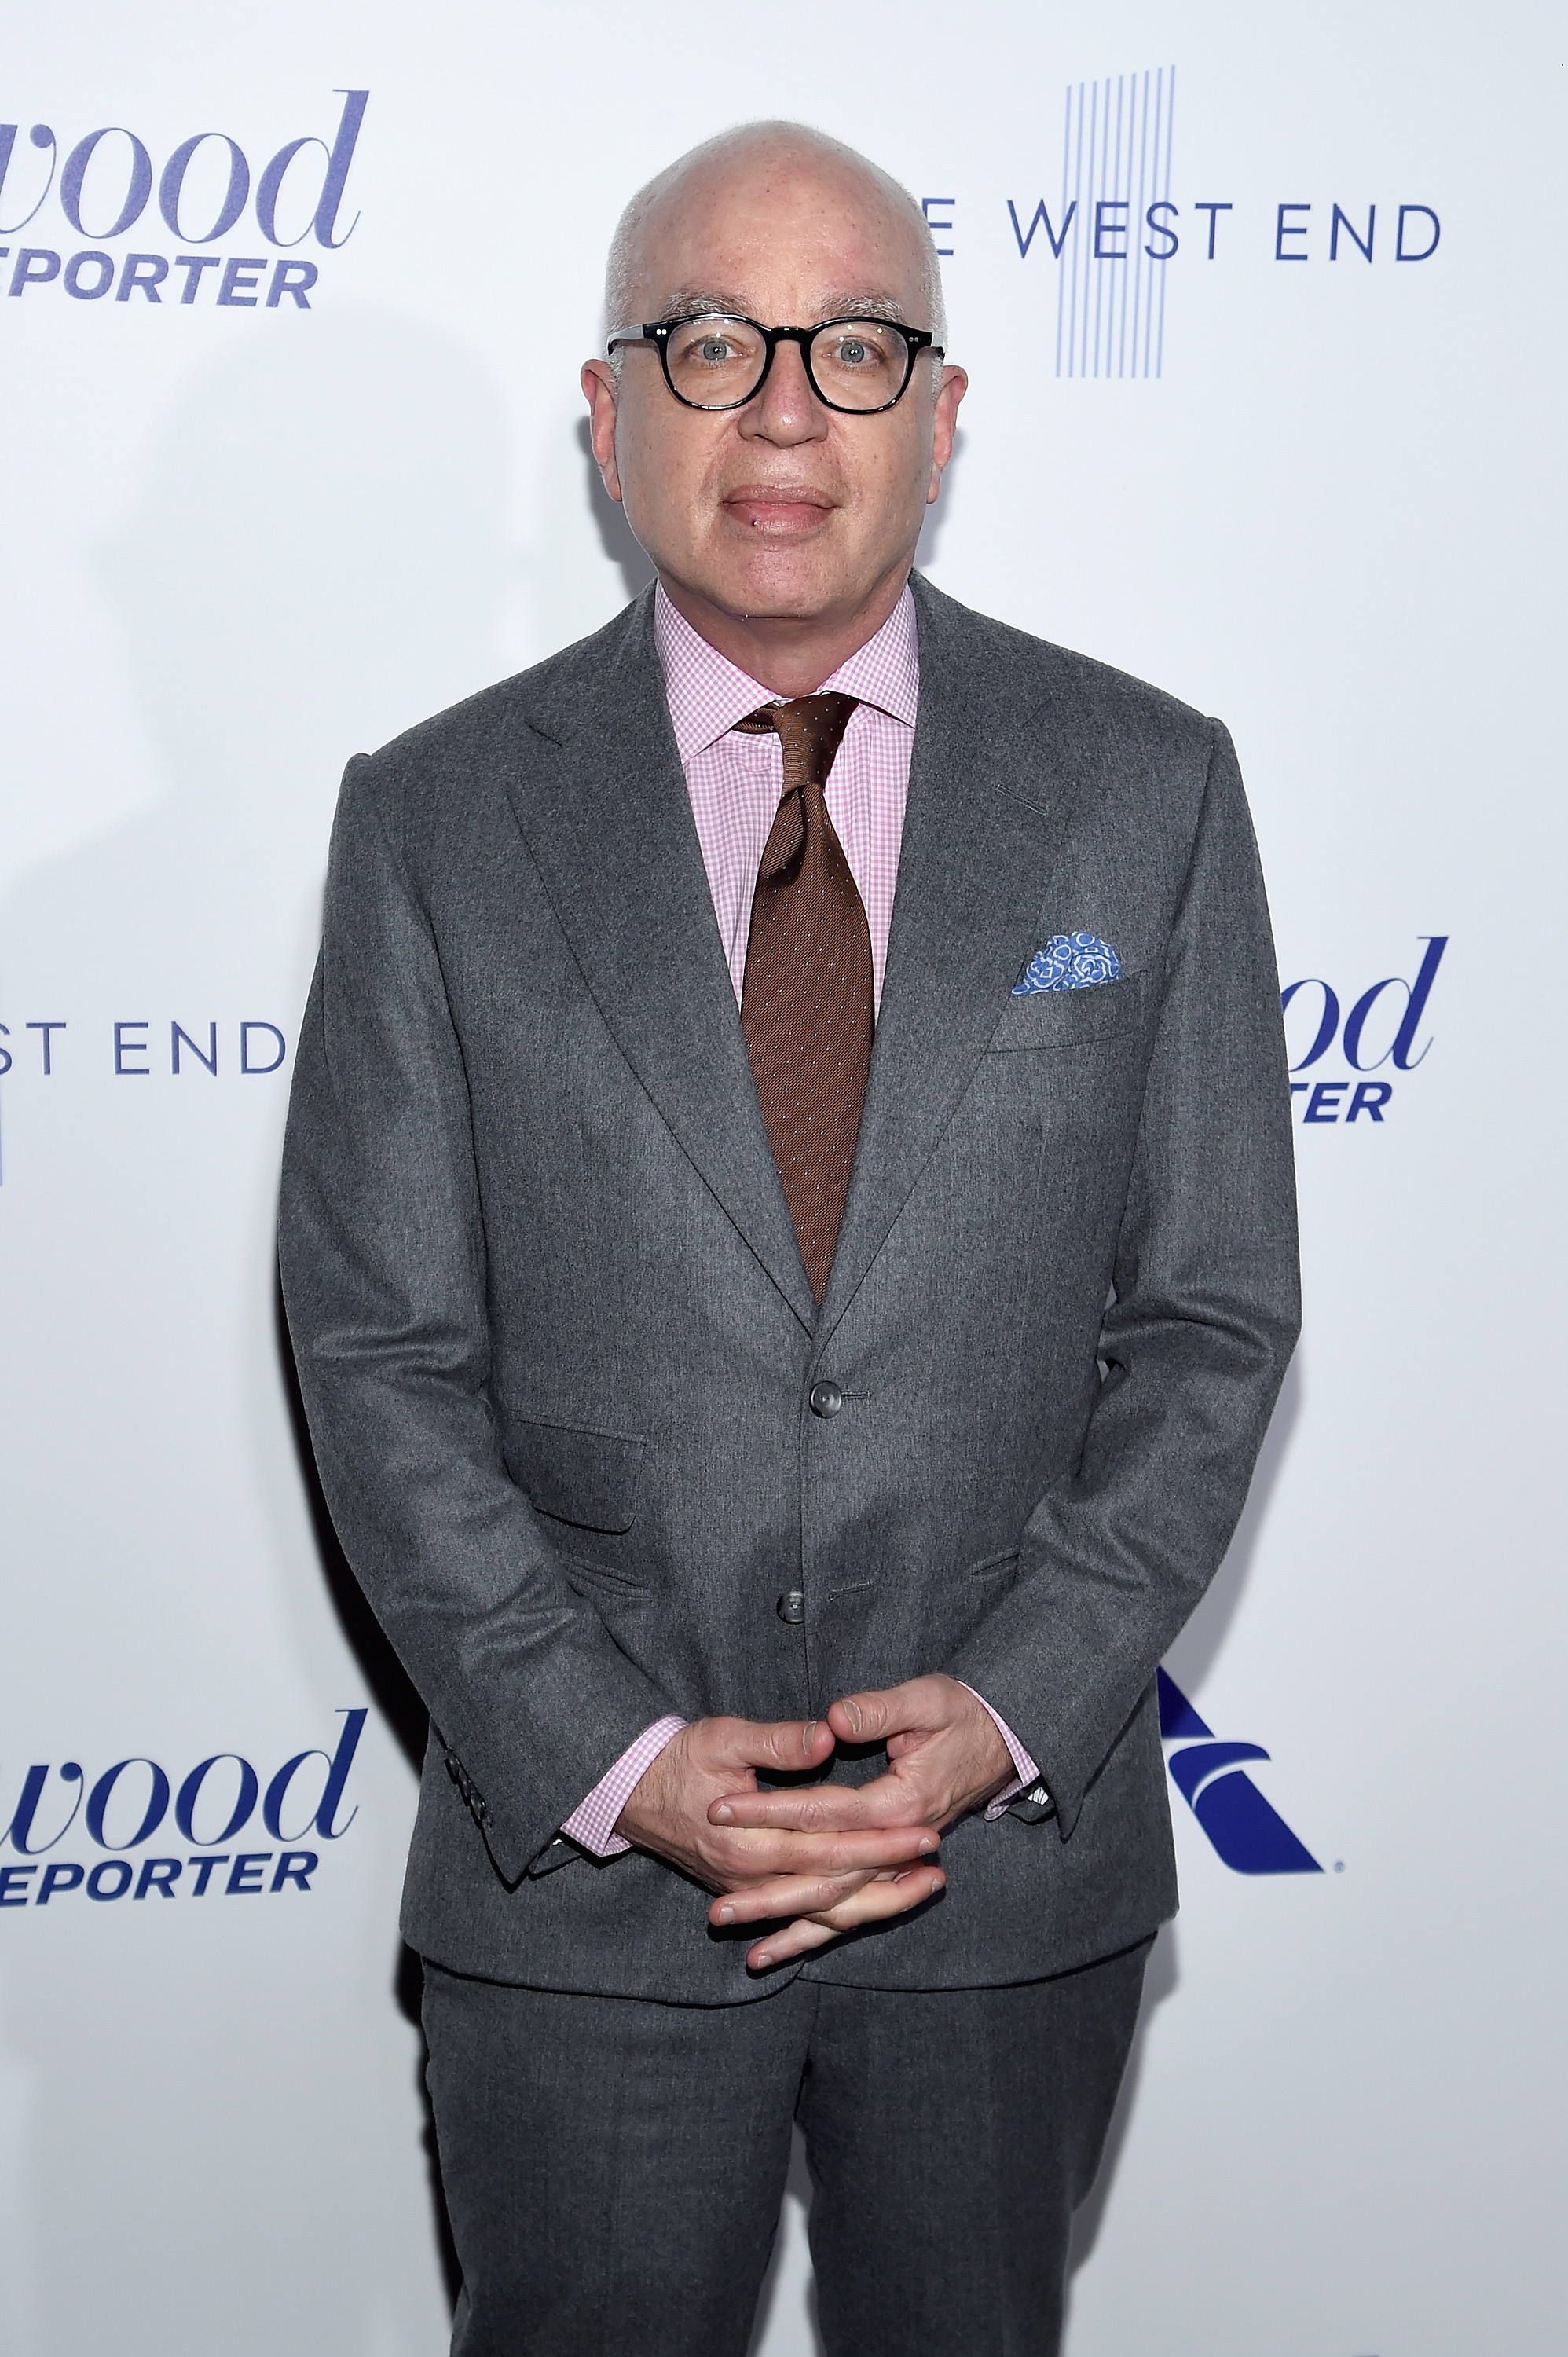 NEW YORK, NY - APRIL 13: Journalist Michael Wolff attends The Hollywood Reporter 35 Most Powerful People In Media 2017 at The Pool on April 13, 2017 in New York City. (Photo by Dimitrios Kambouris/Getty Images for The Hollywood Reporter)